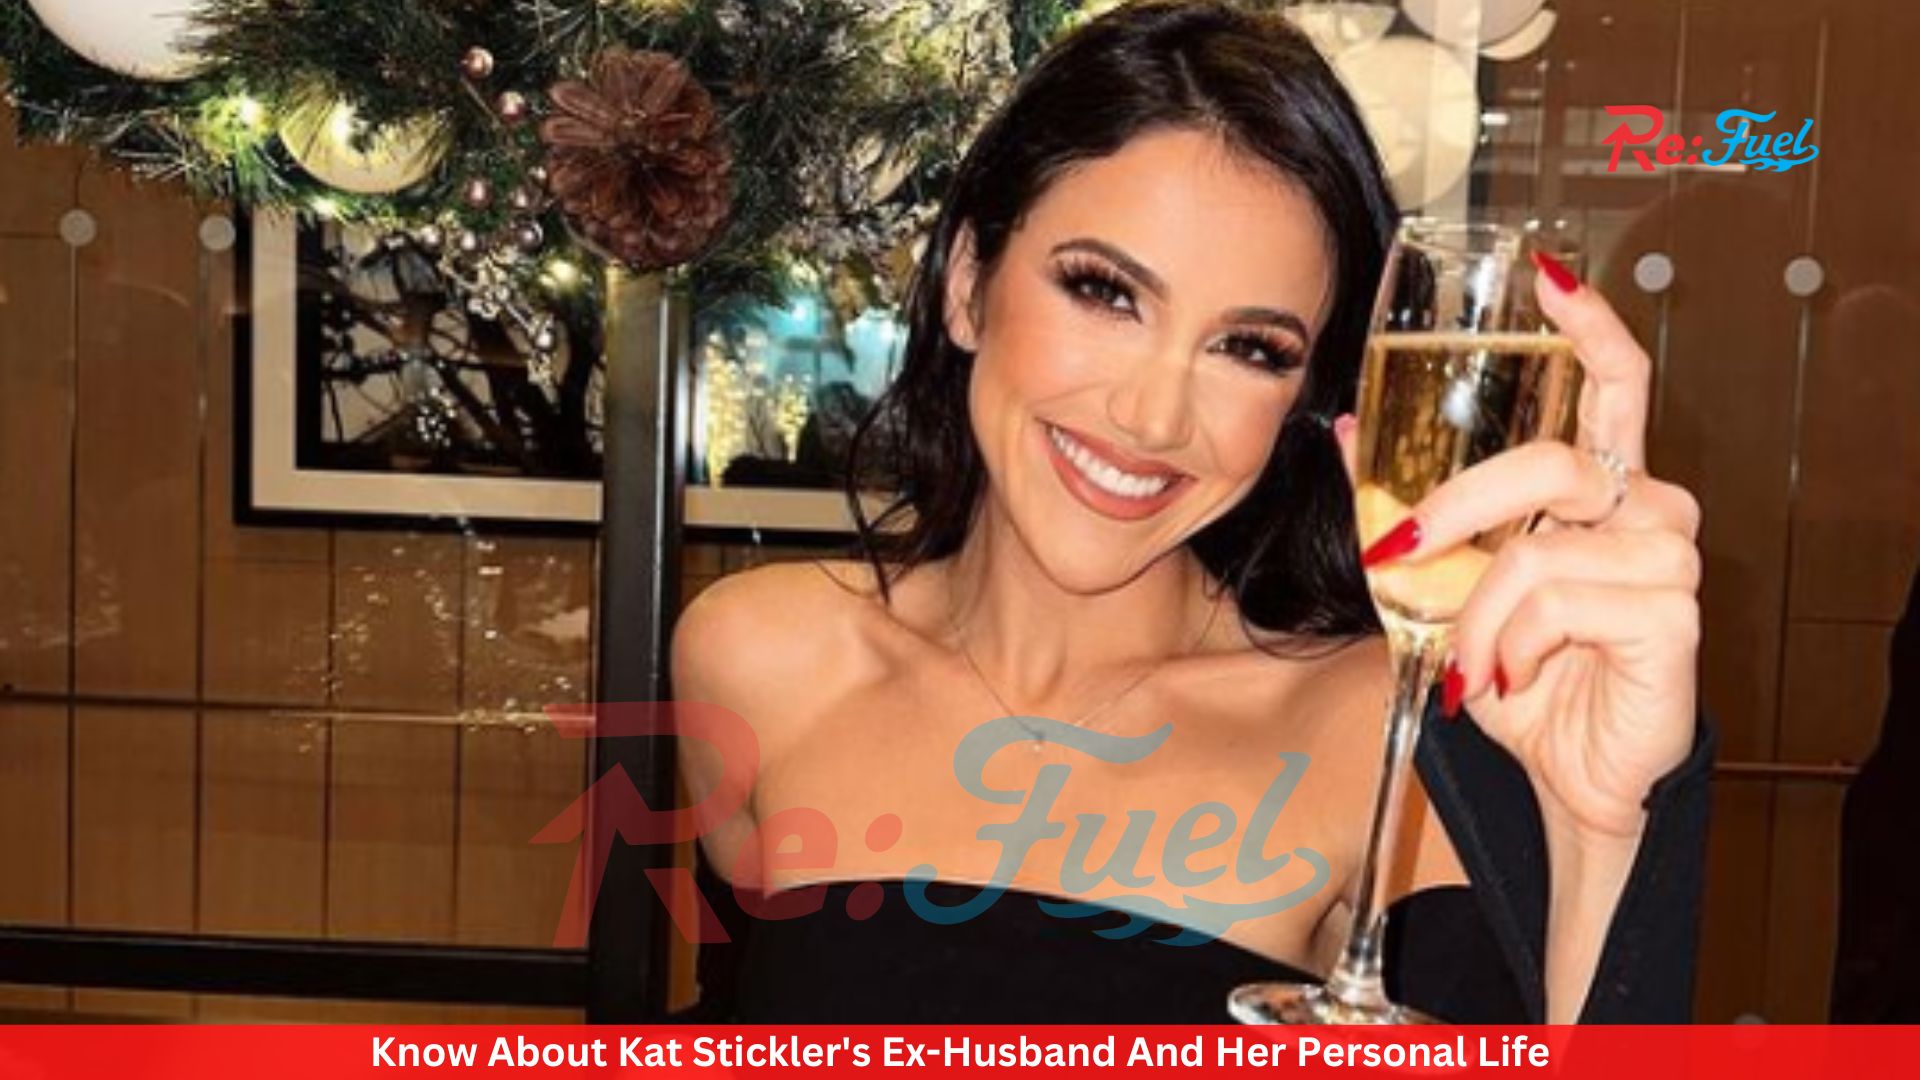 Know About Kat Stickler's Ex-Husband And Her Personal Life